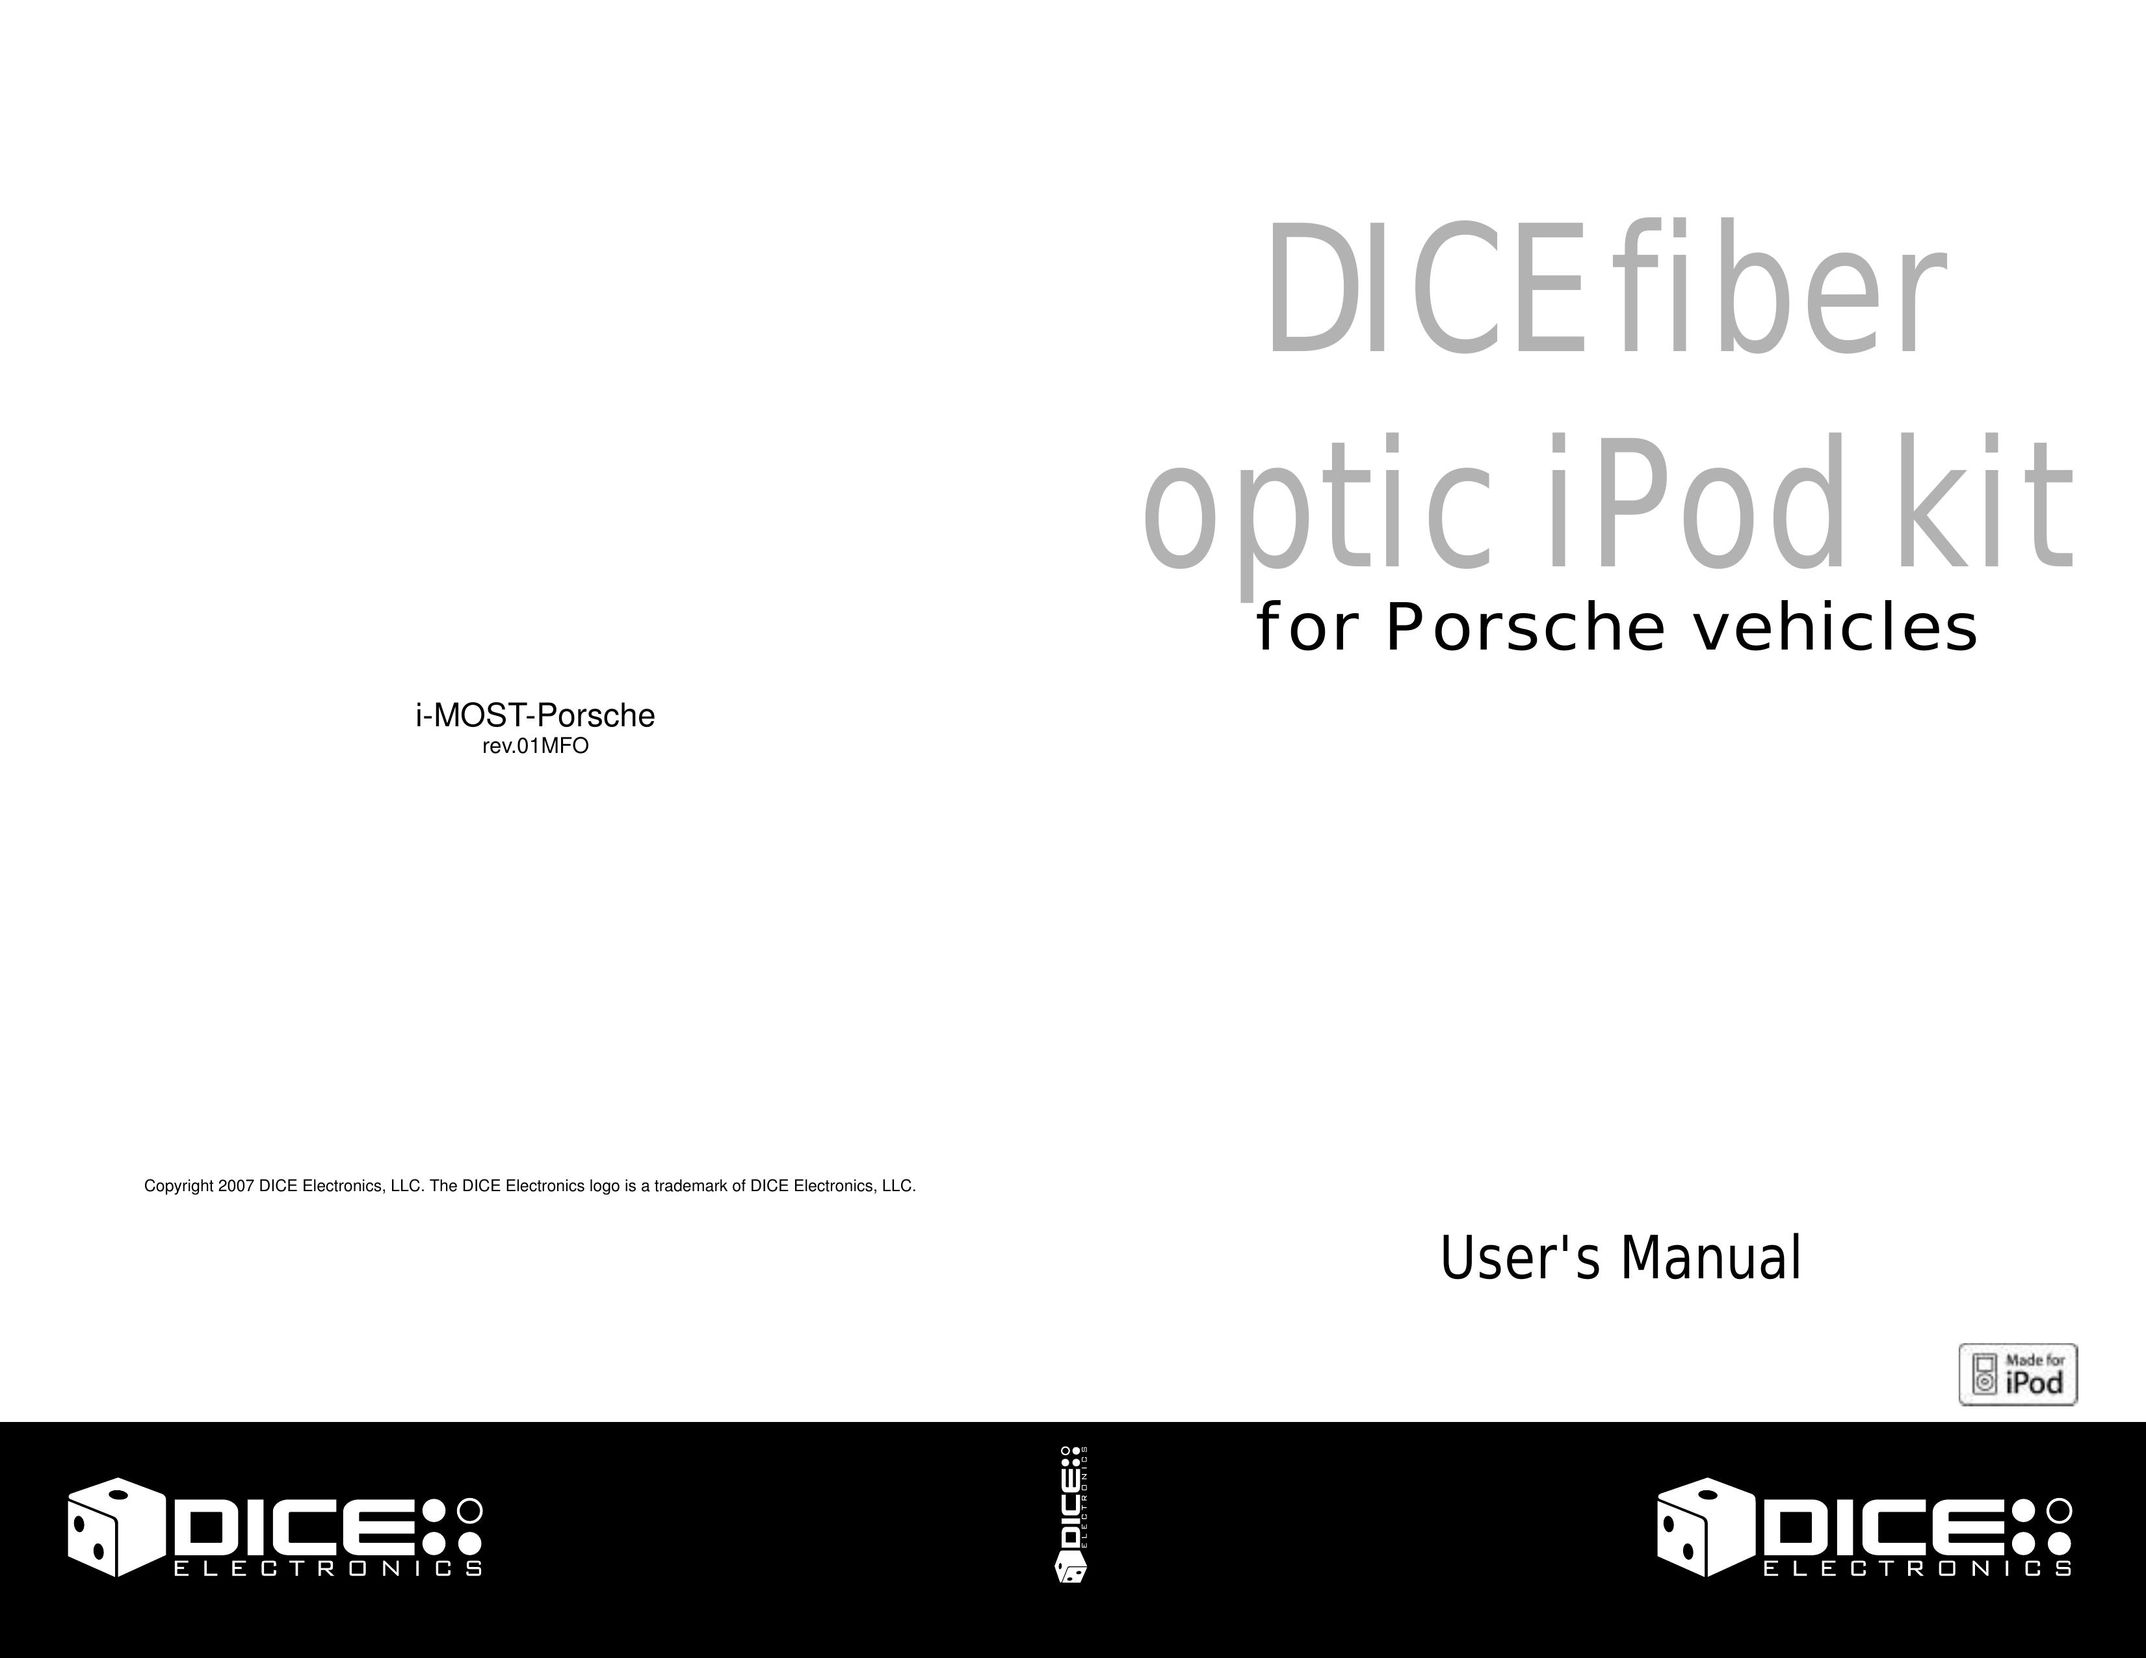 Dice electronic HDL 2201 Car Stereo System User Manual